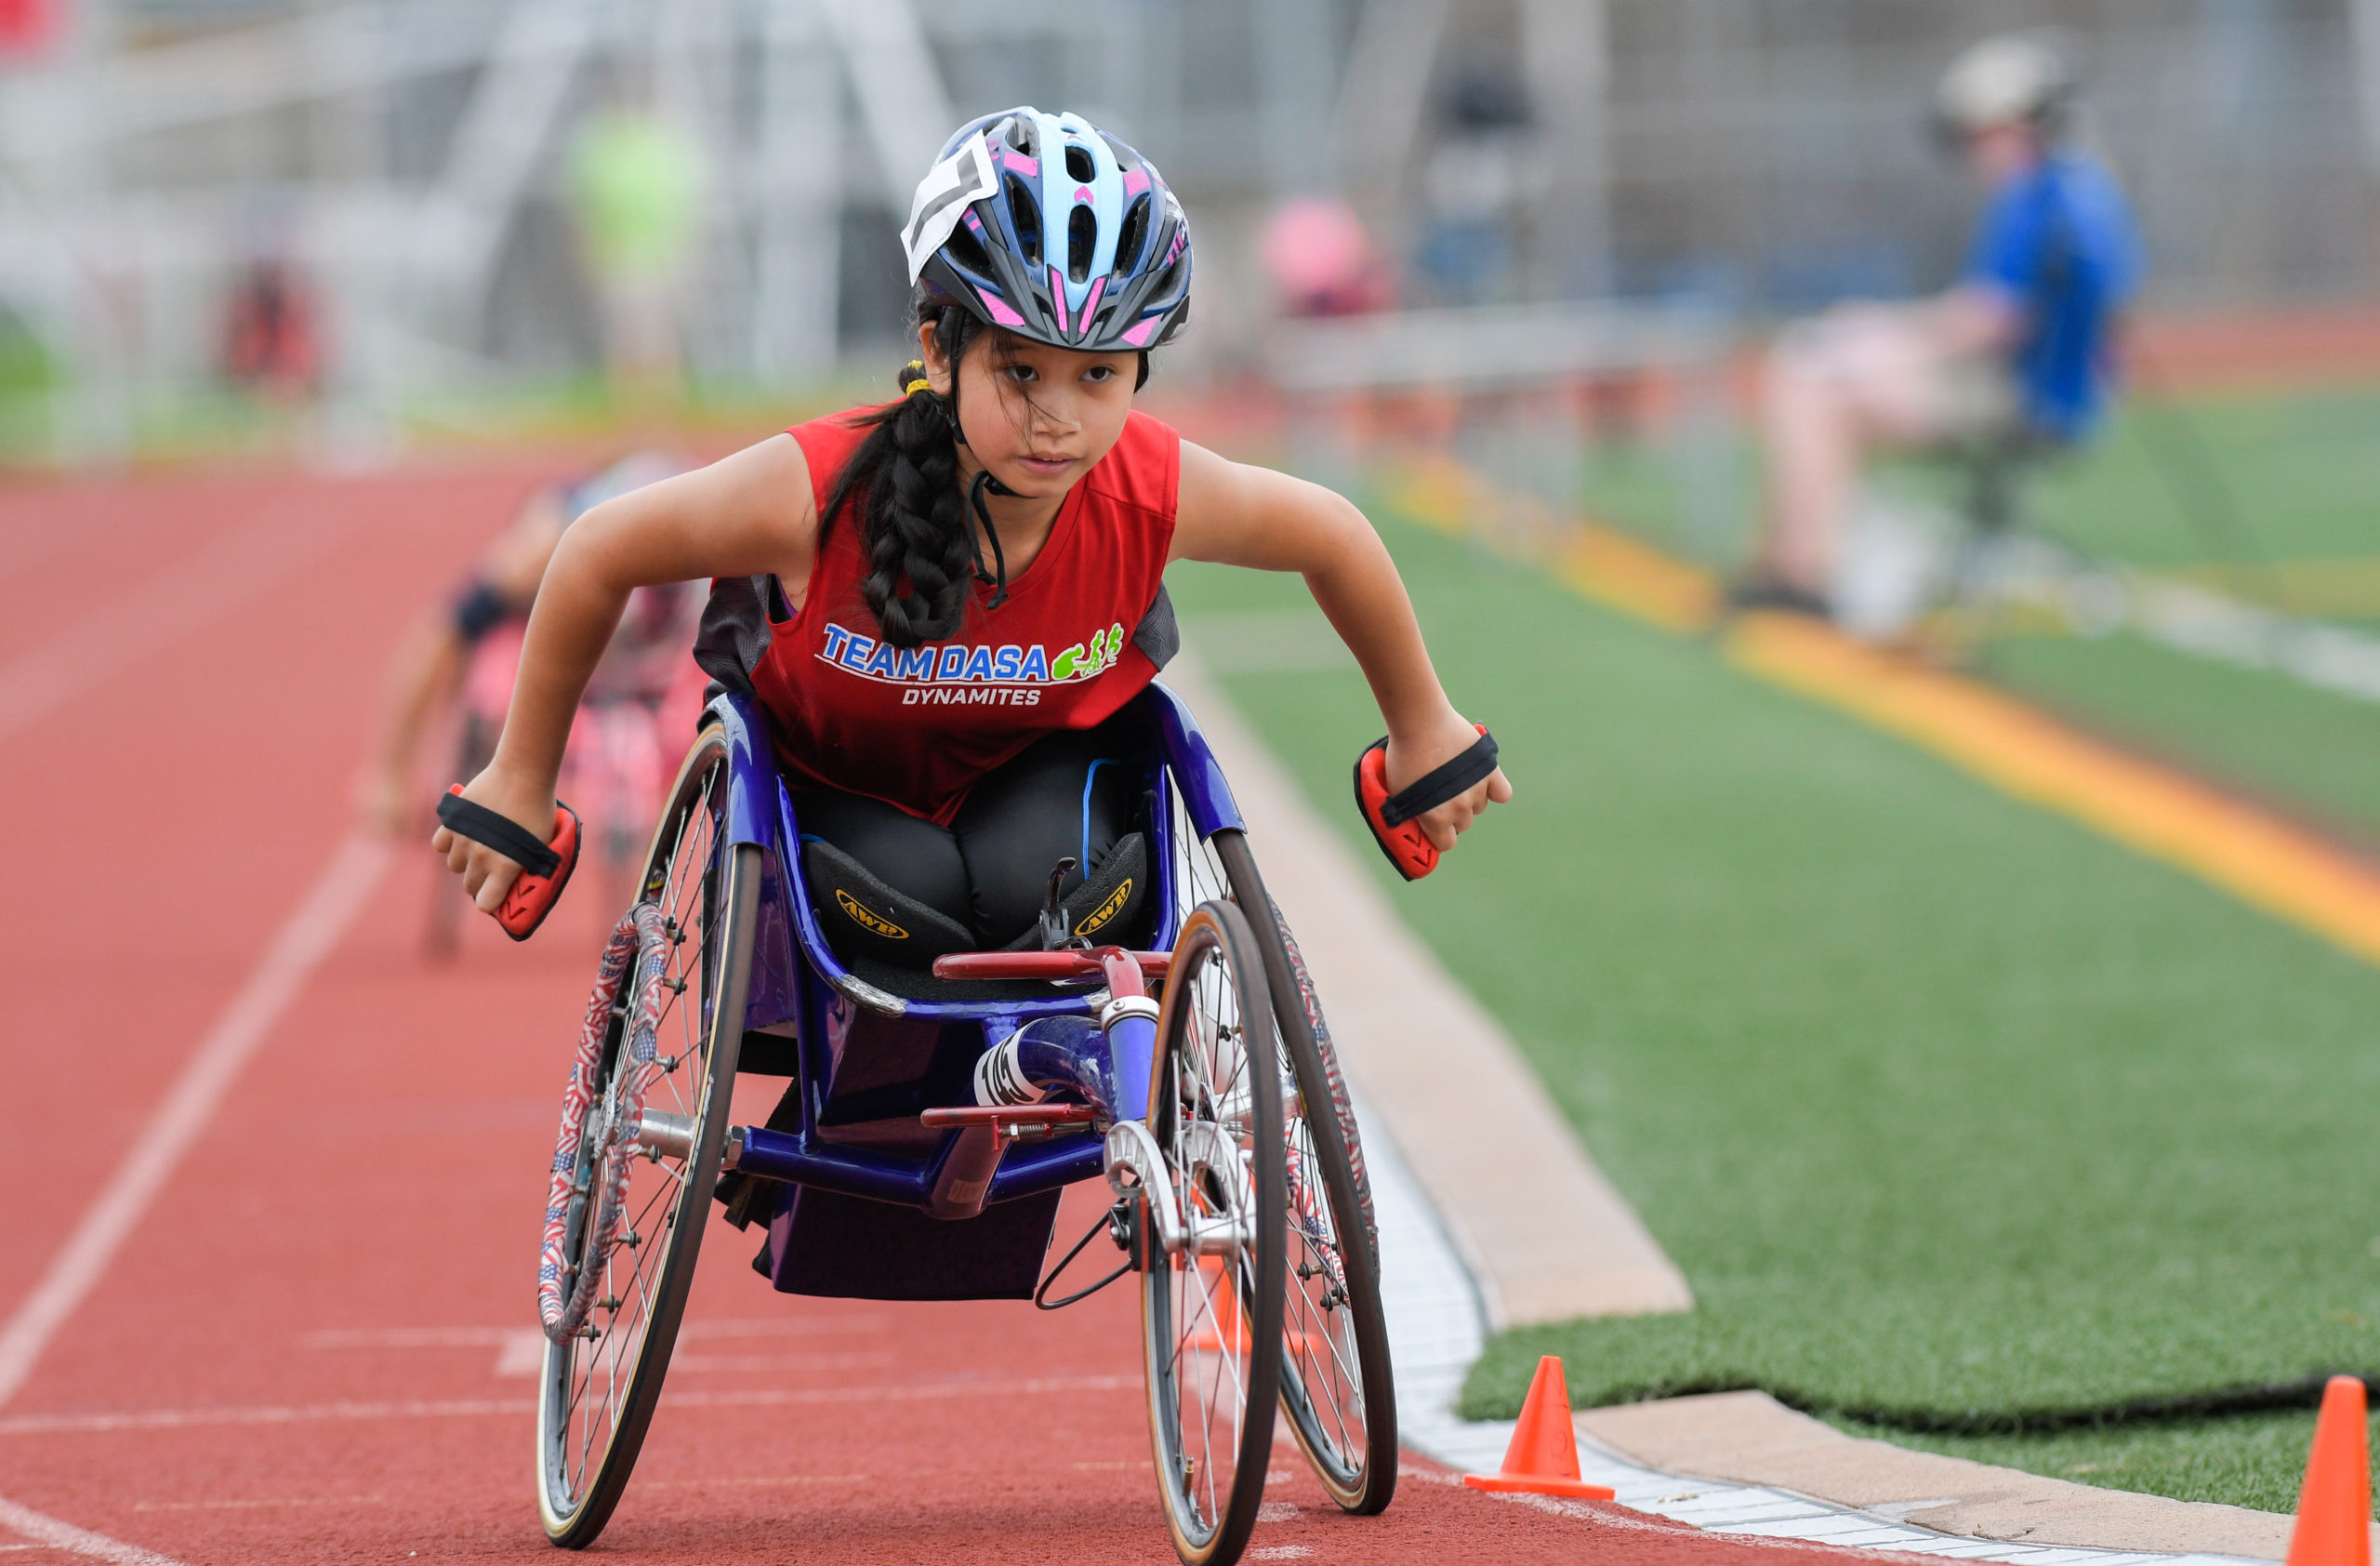 Female athlete competing in racing wheelchair